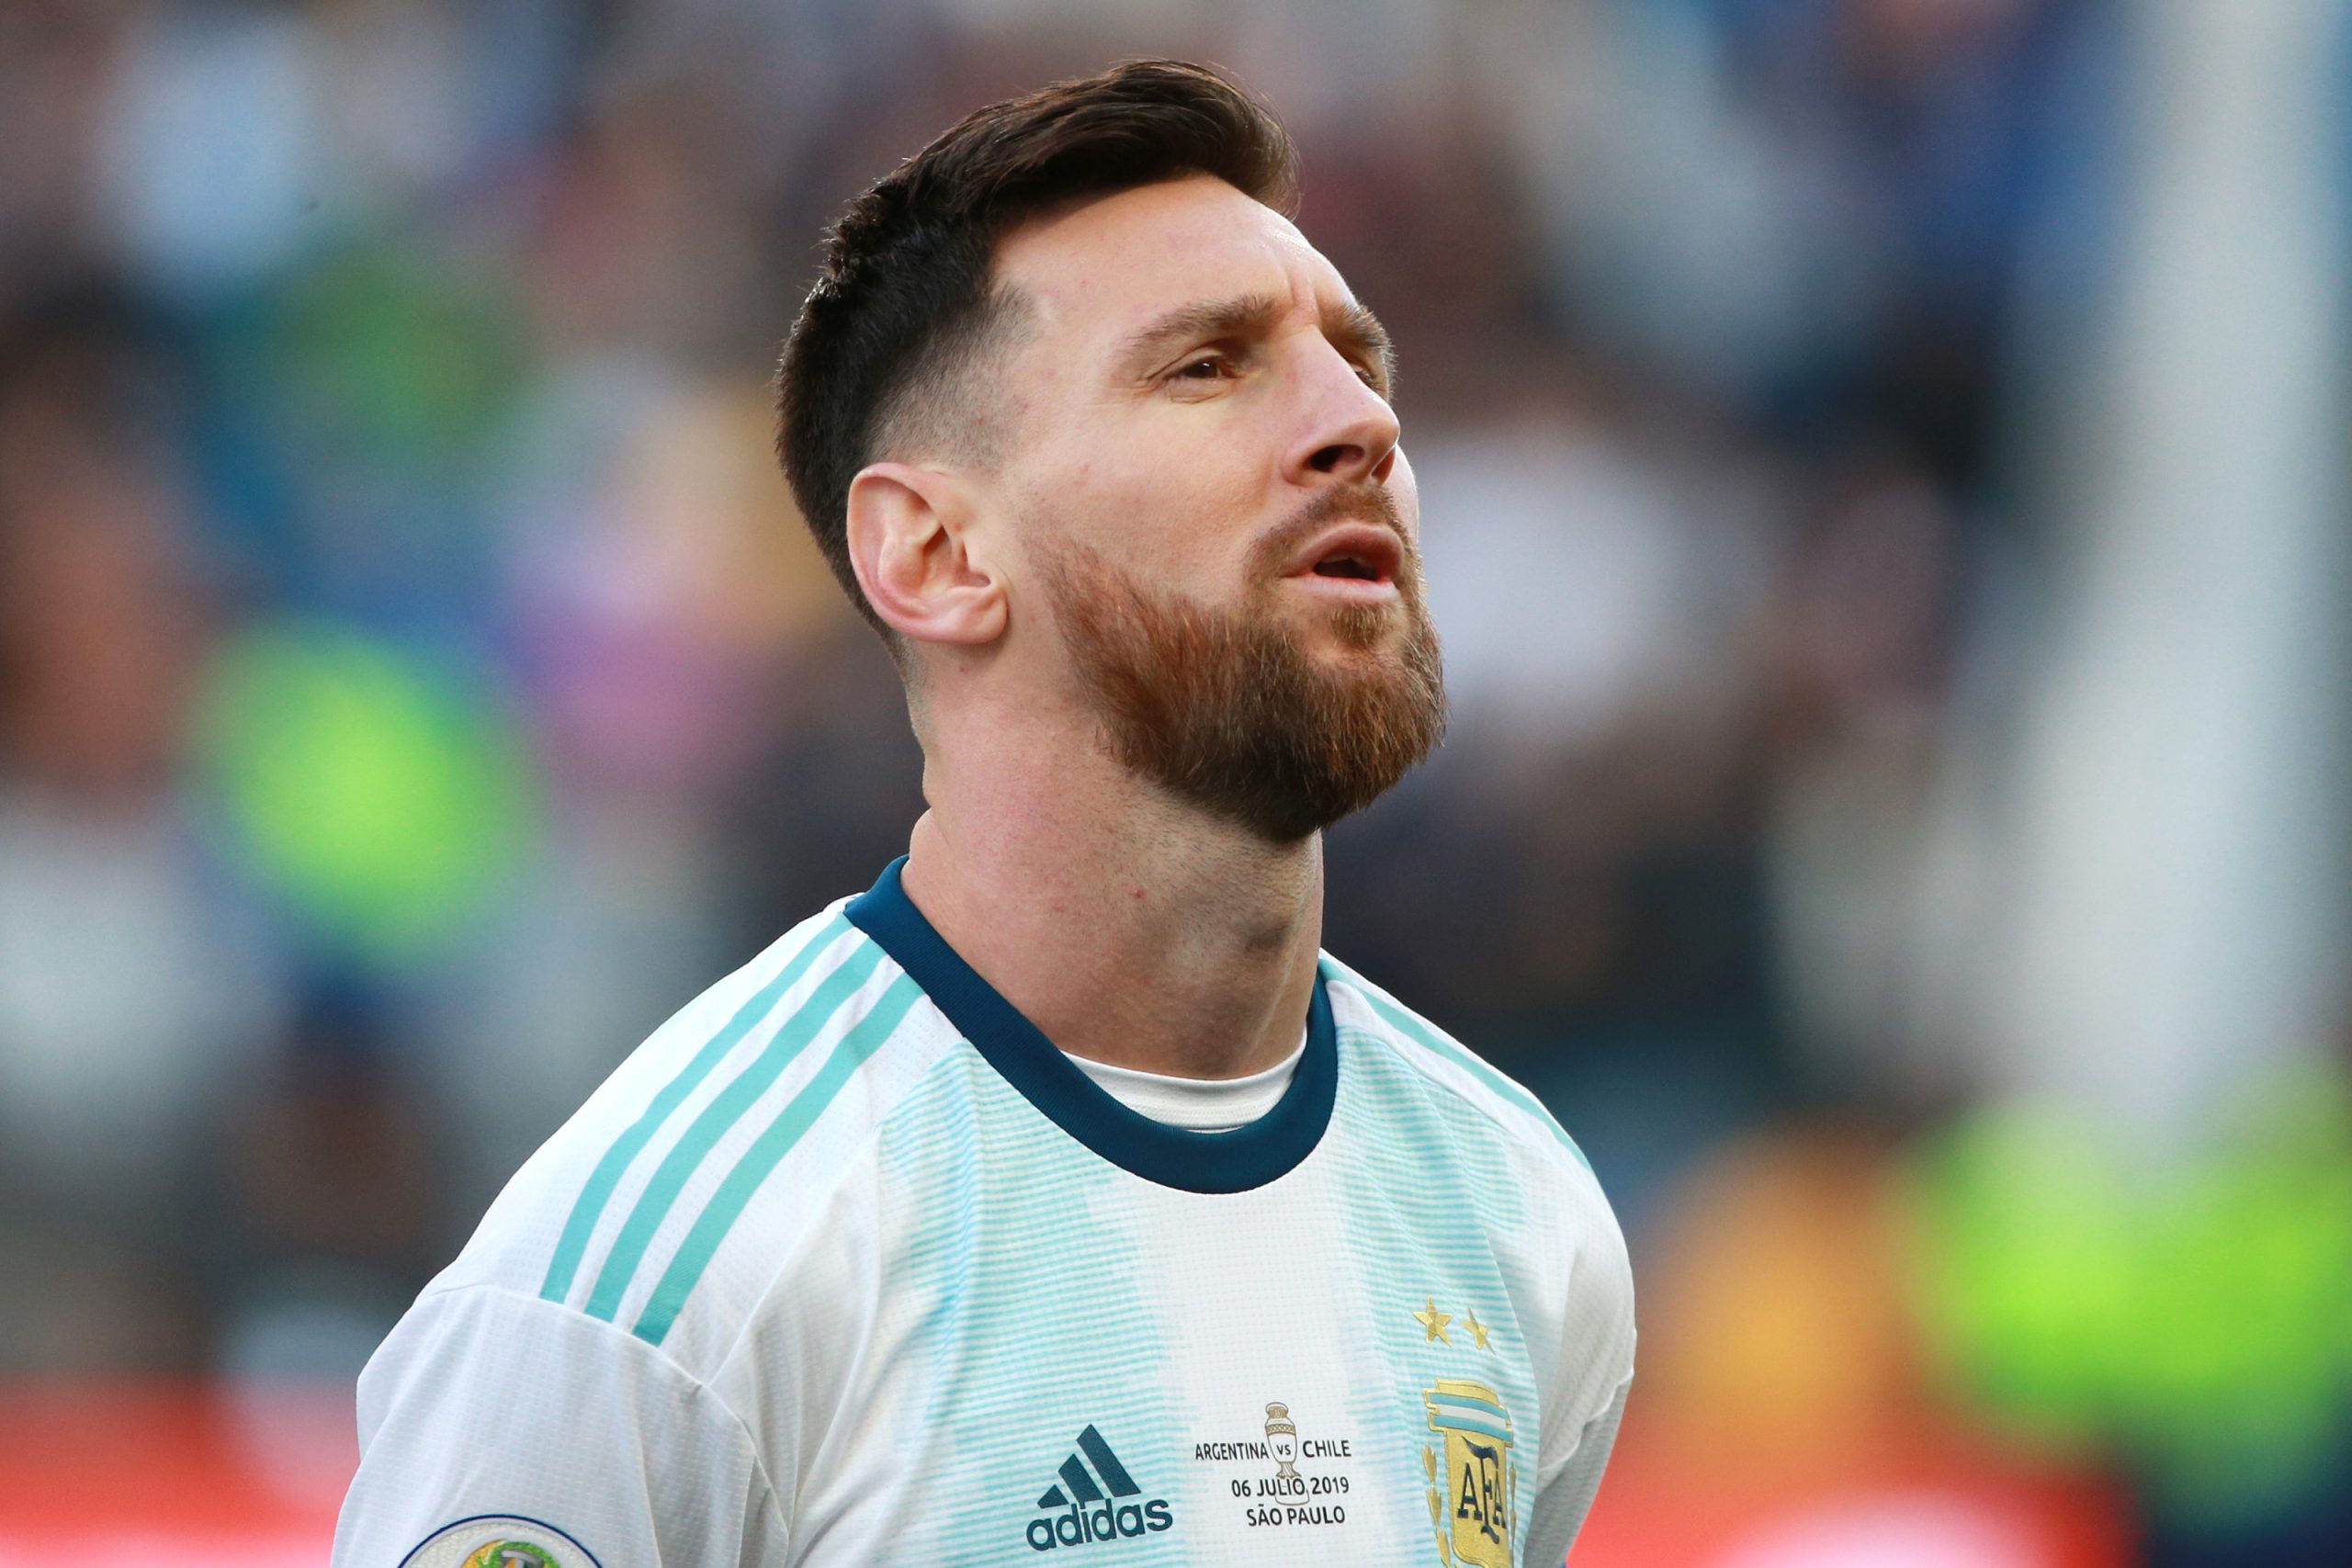 Messi will play against Brazil confirms Argentina boss Scaloni